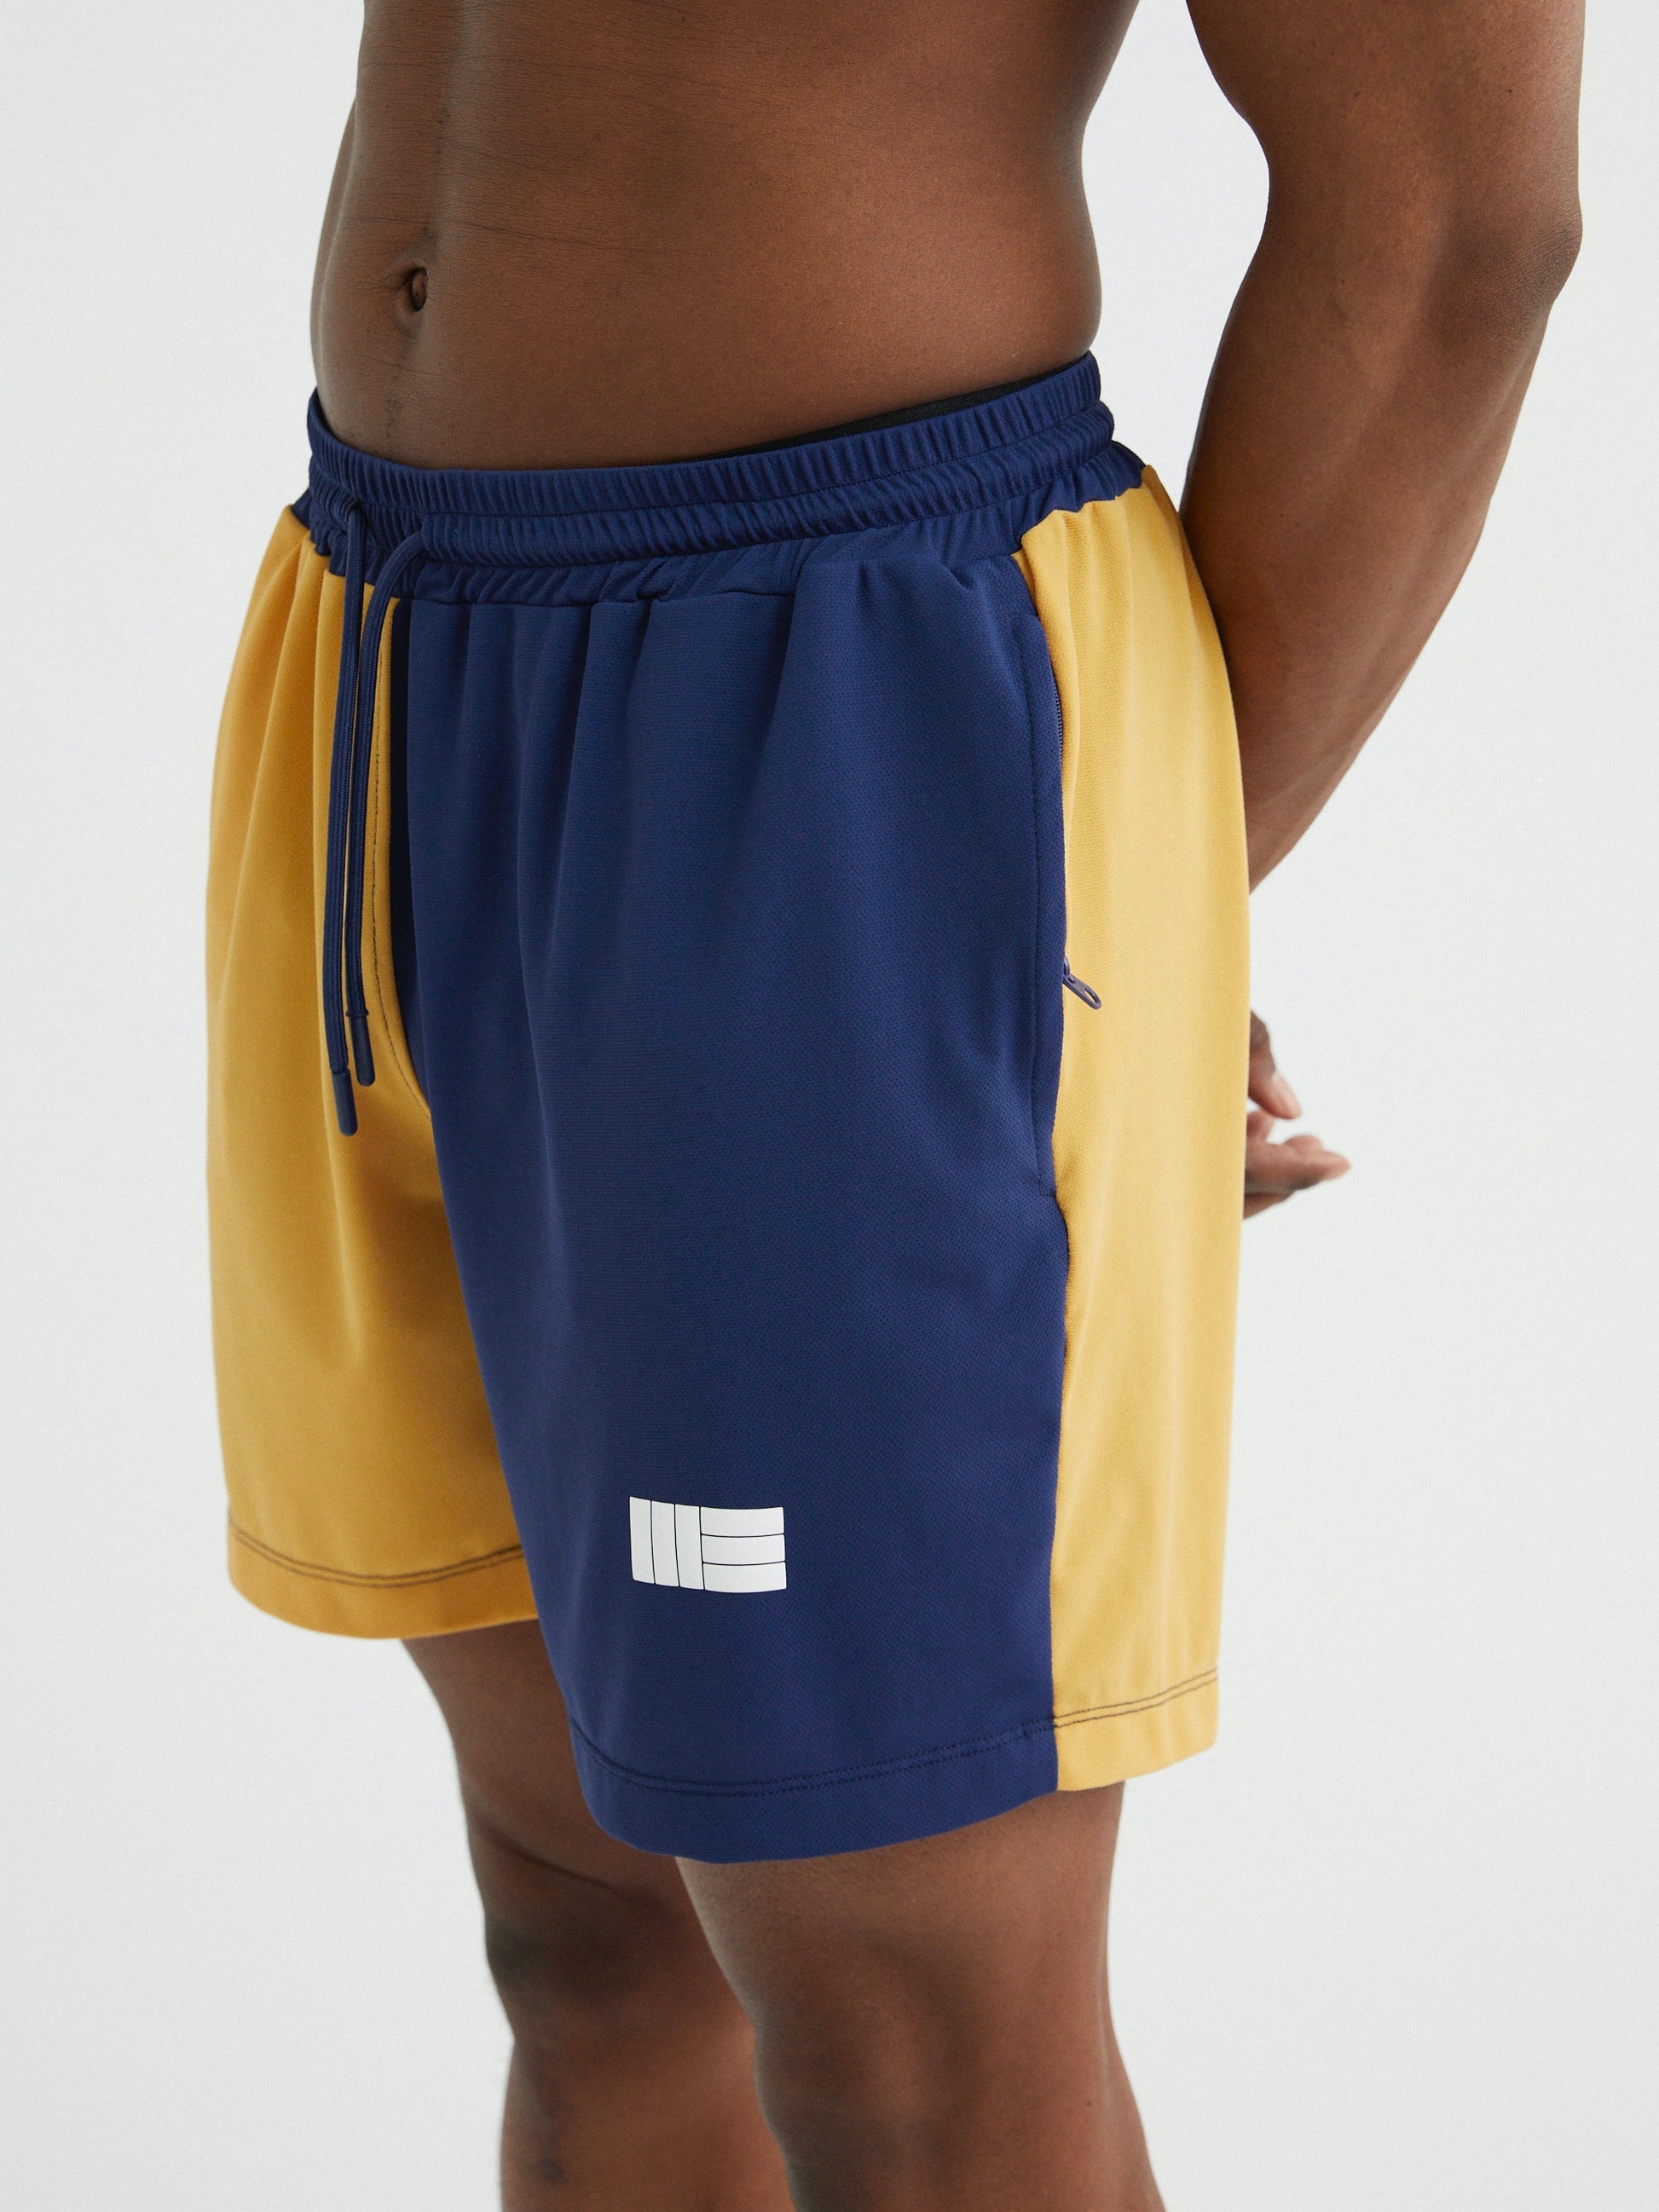 Mens Premium Athletic Sport Shorts Made in NYC - Navy / Yellow